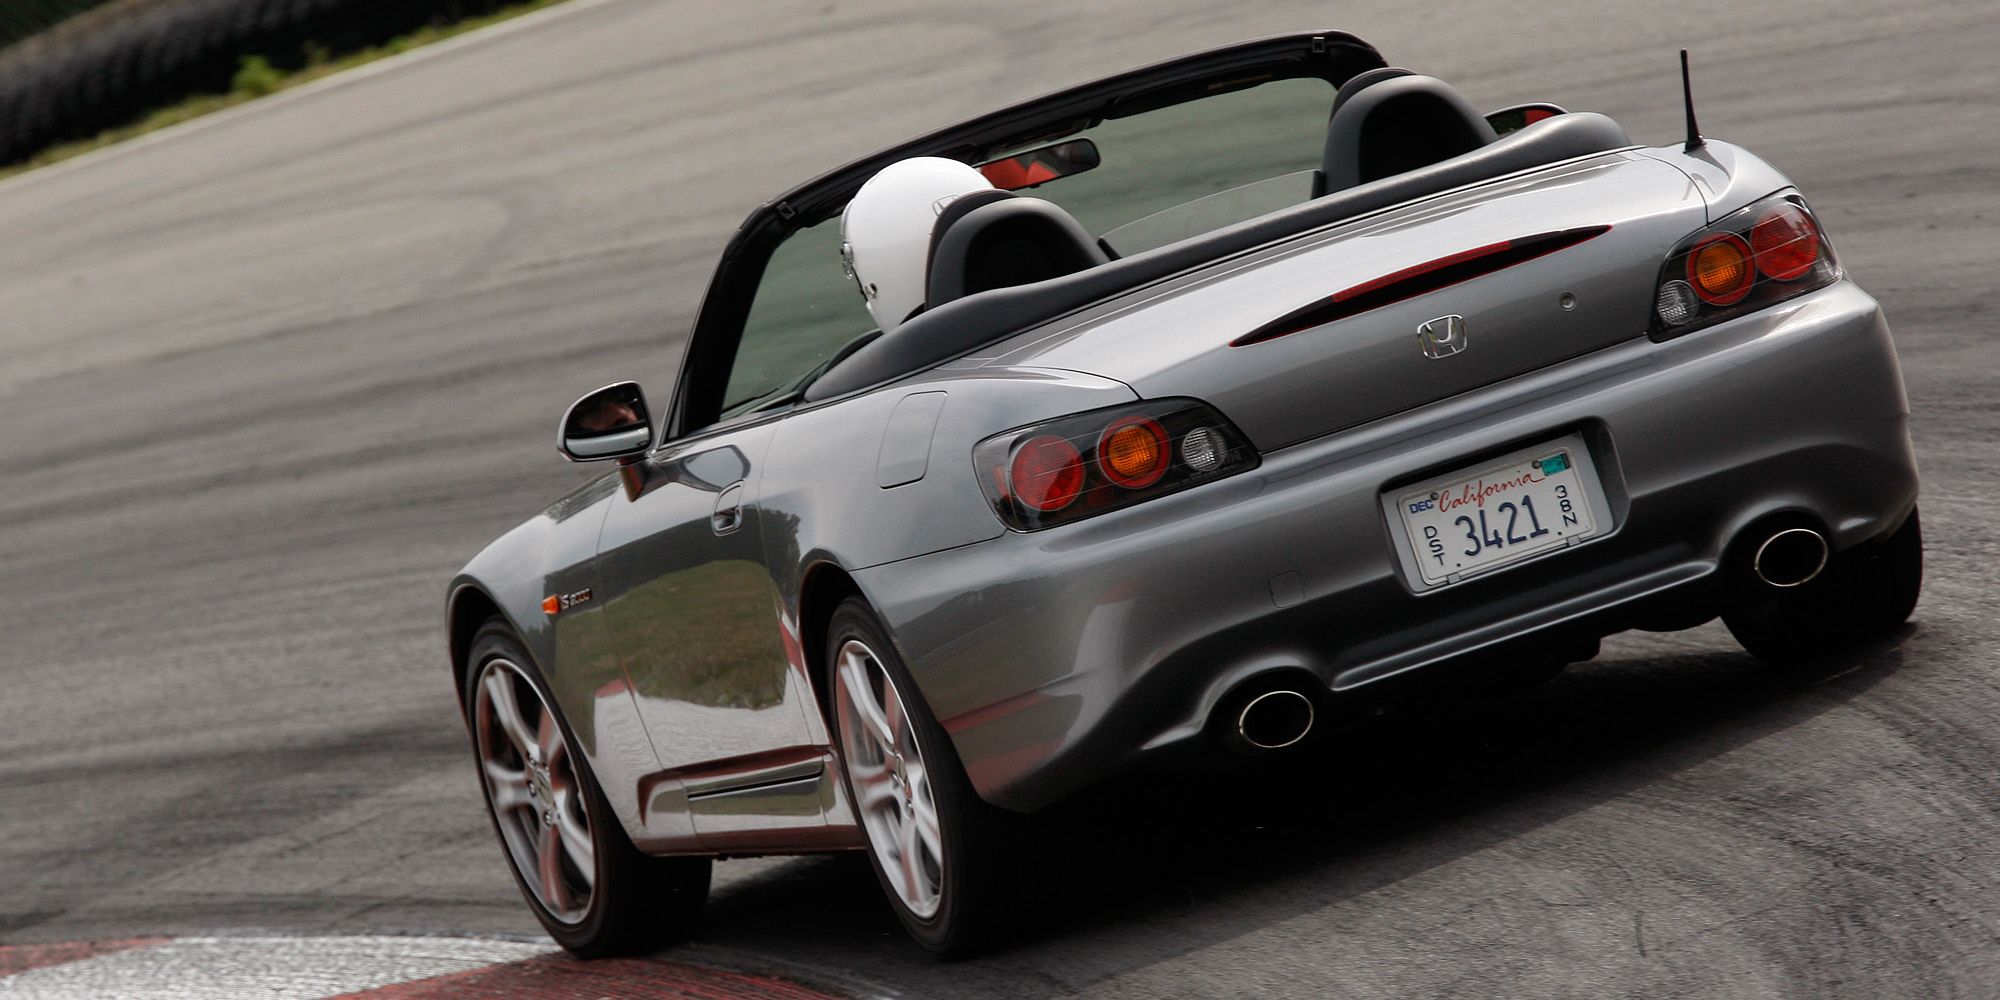 The rear of the S2000 AP2 on track